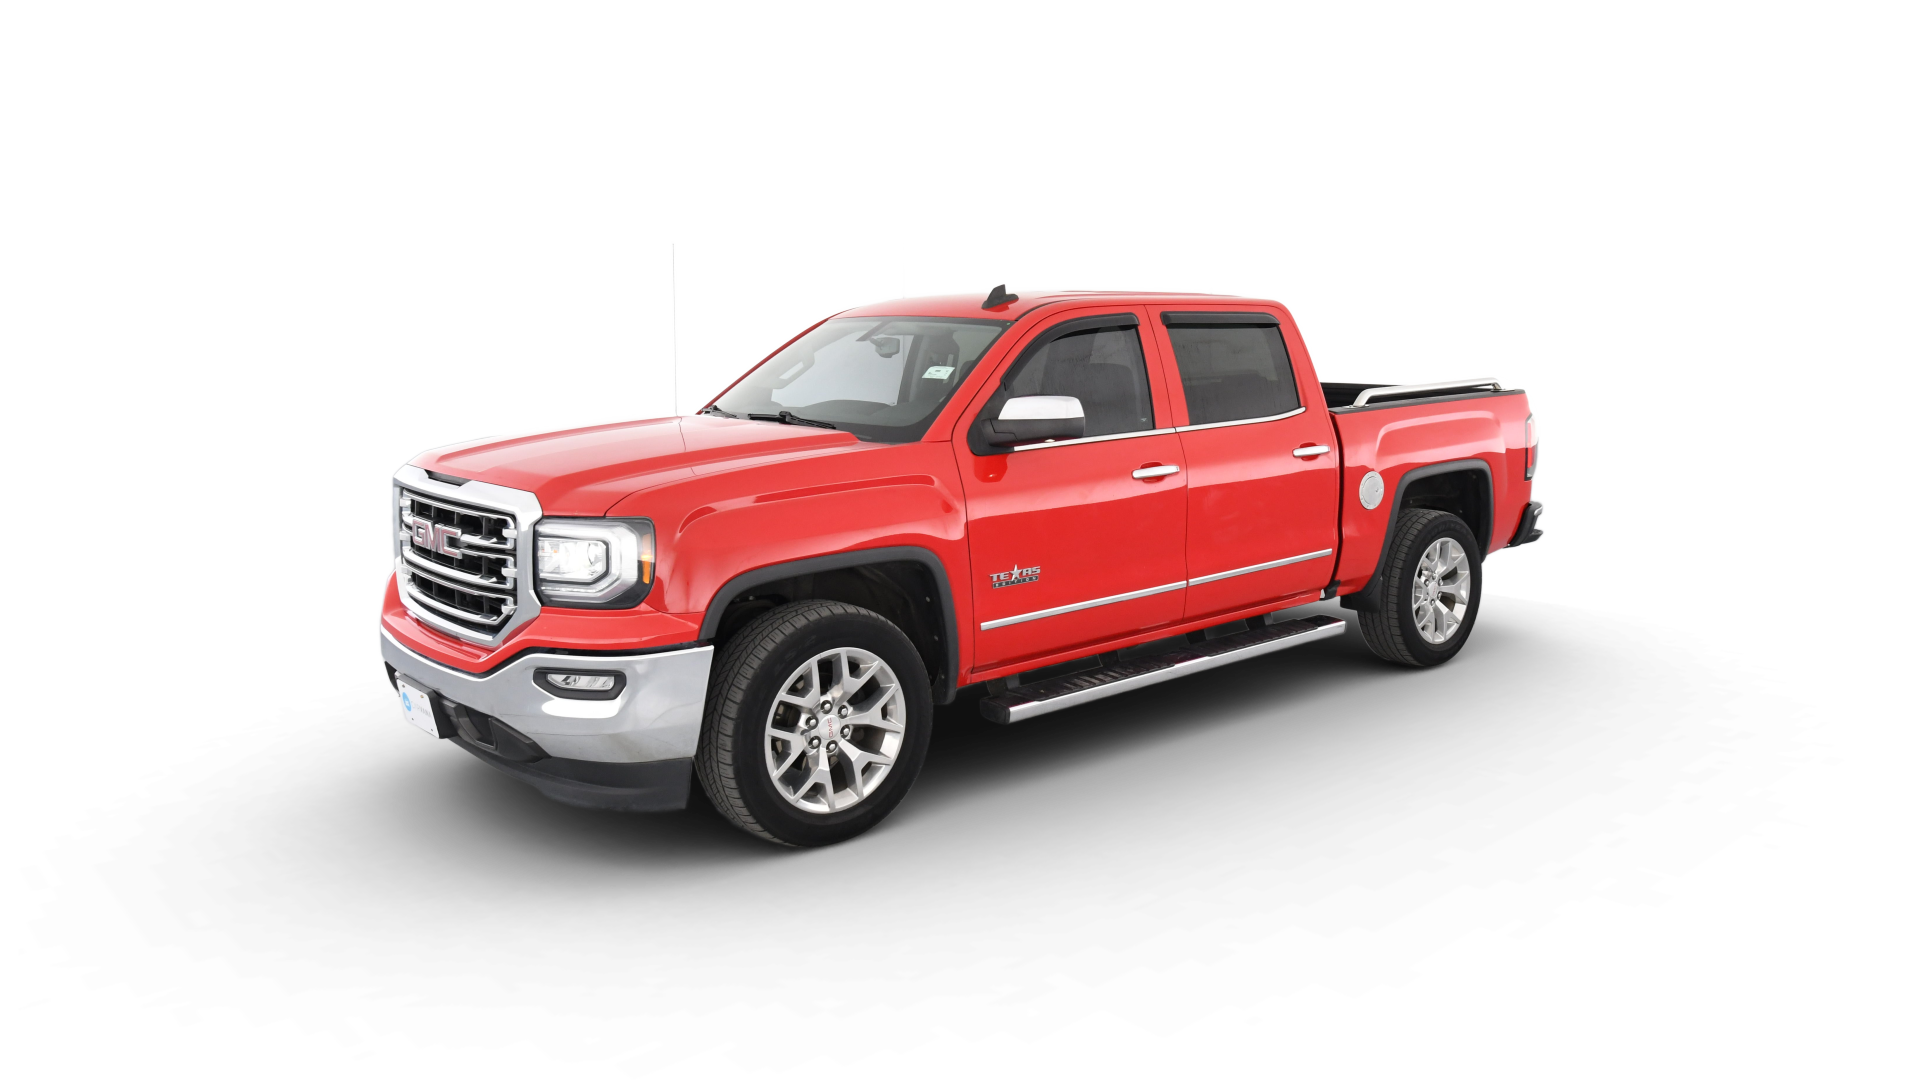 Ballade Moden kedelig Used Red GMC Sierra 1500 Crew Cab For Sale Online | Carvana